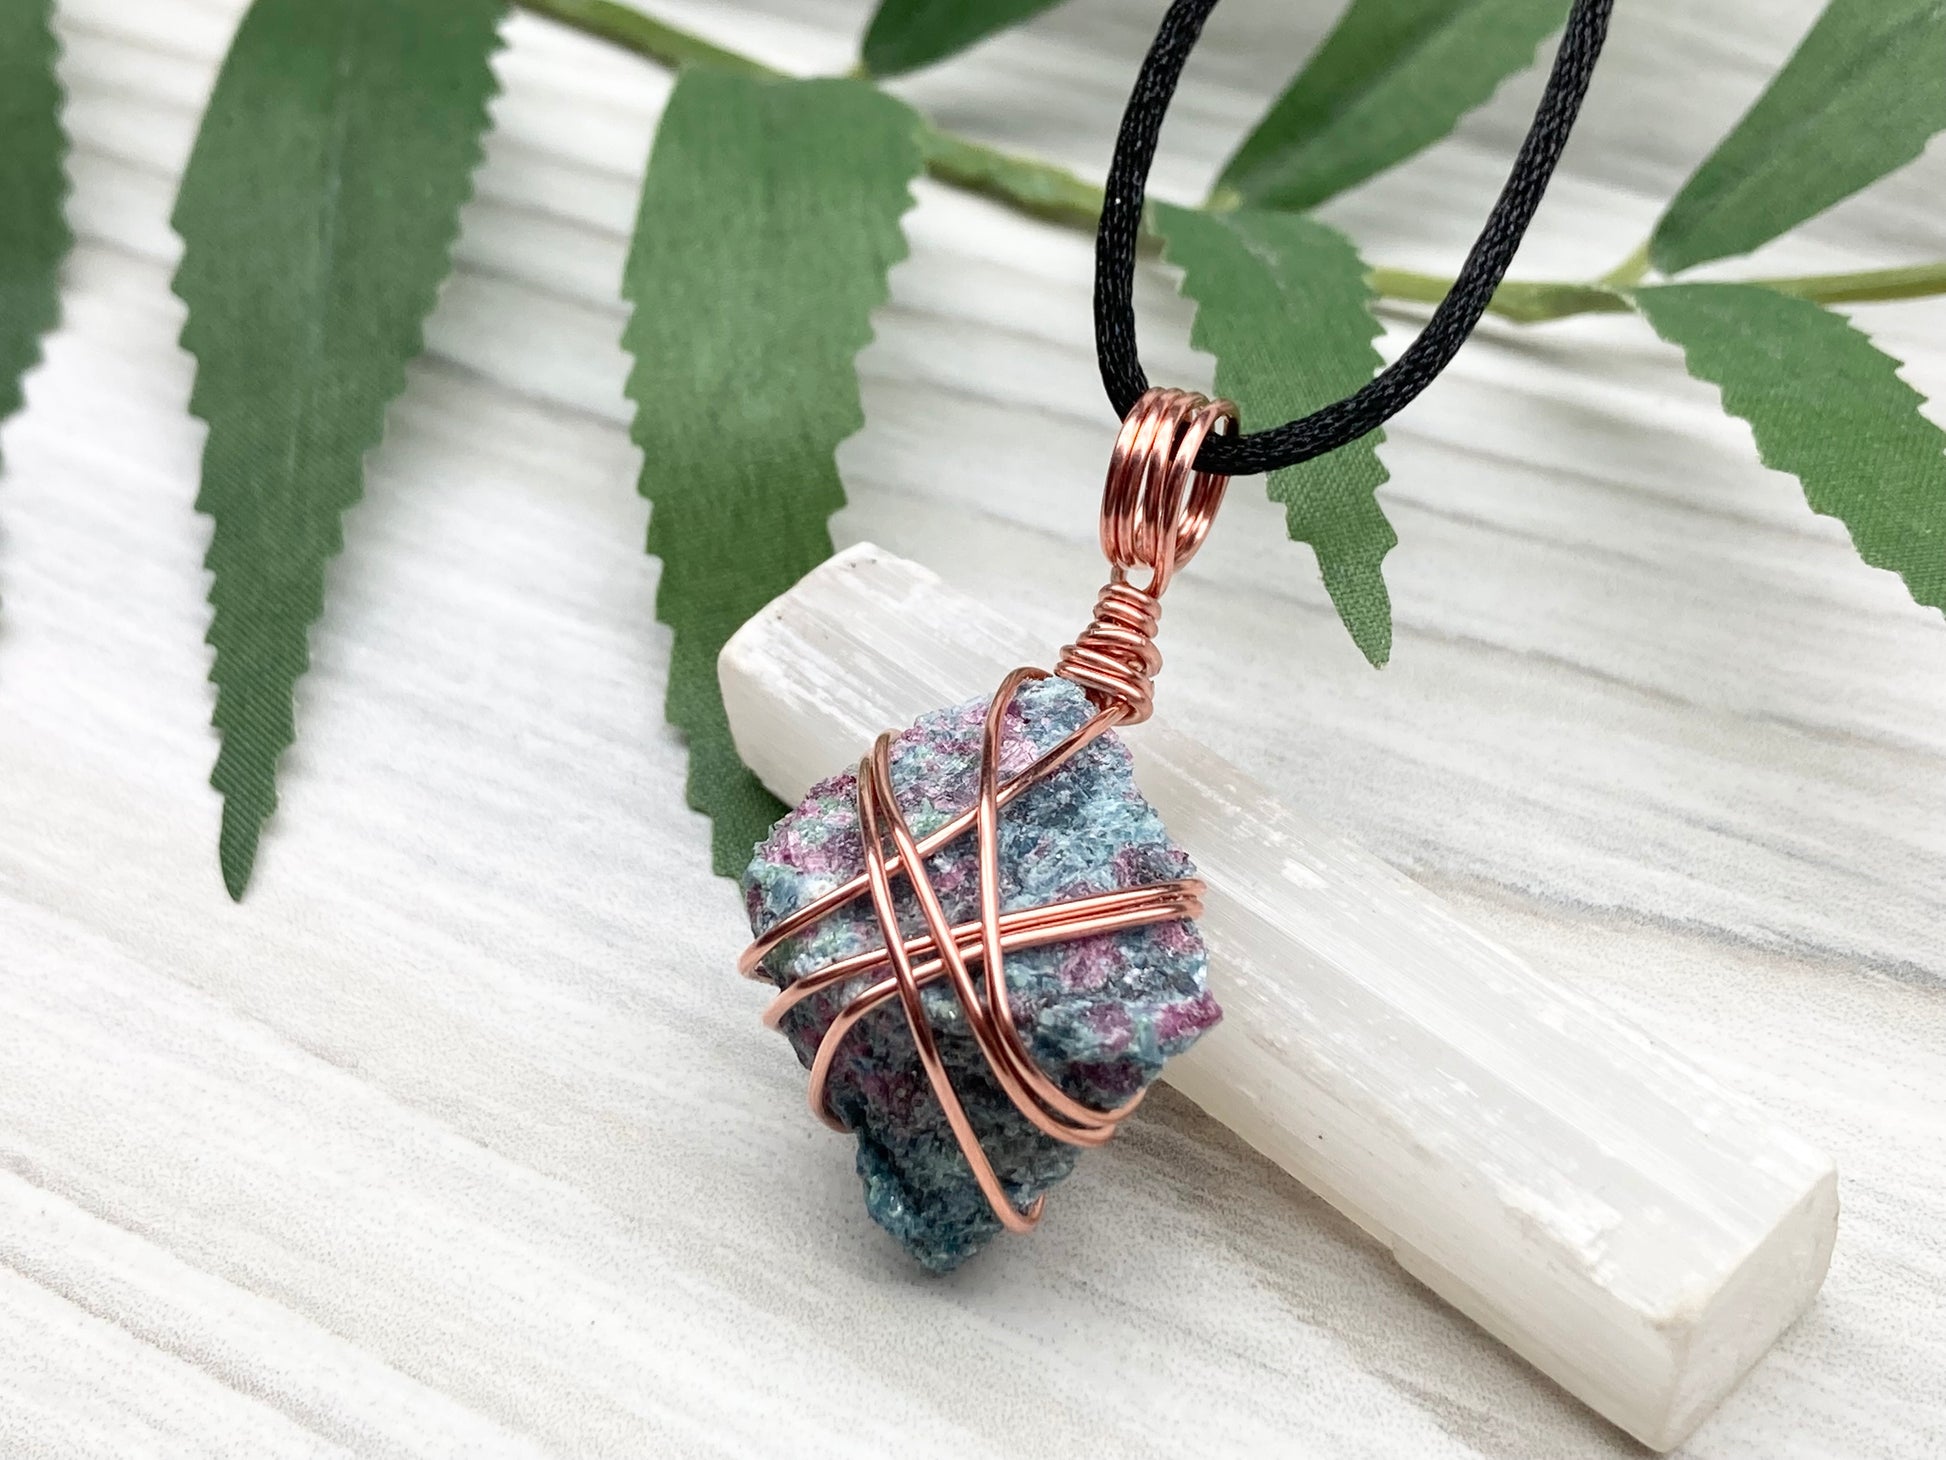 Rough Raw Ruby Zoisite Necklace. This Ruby Zoisite Crystal Is Hand Wrapped With Pure Copper Wire. This Stone is Blue and Red Colored. Gemstone Comes On A Black Chain. Spiritual New Age Style Unisex Jewelry.